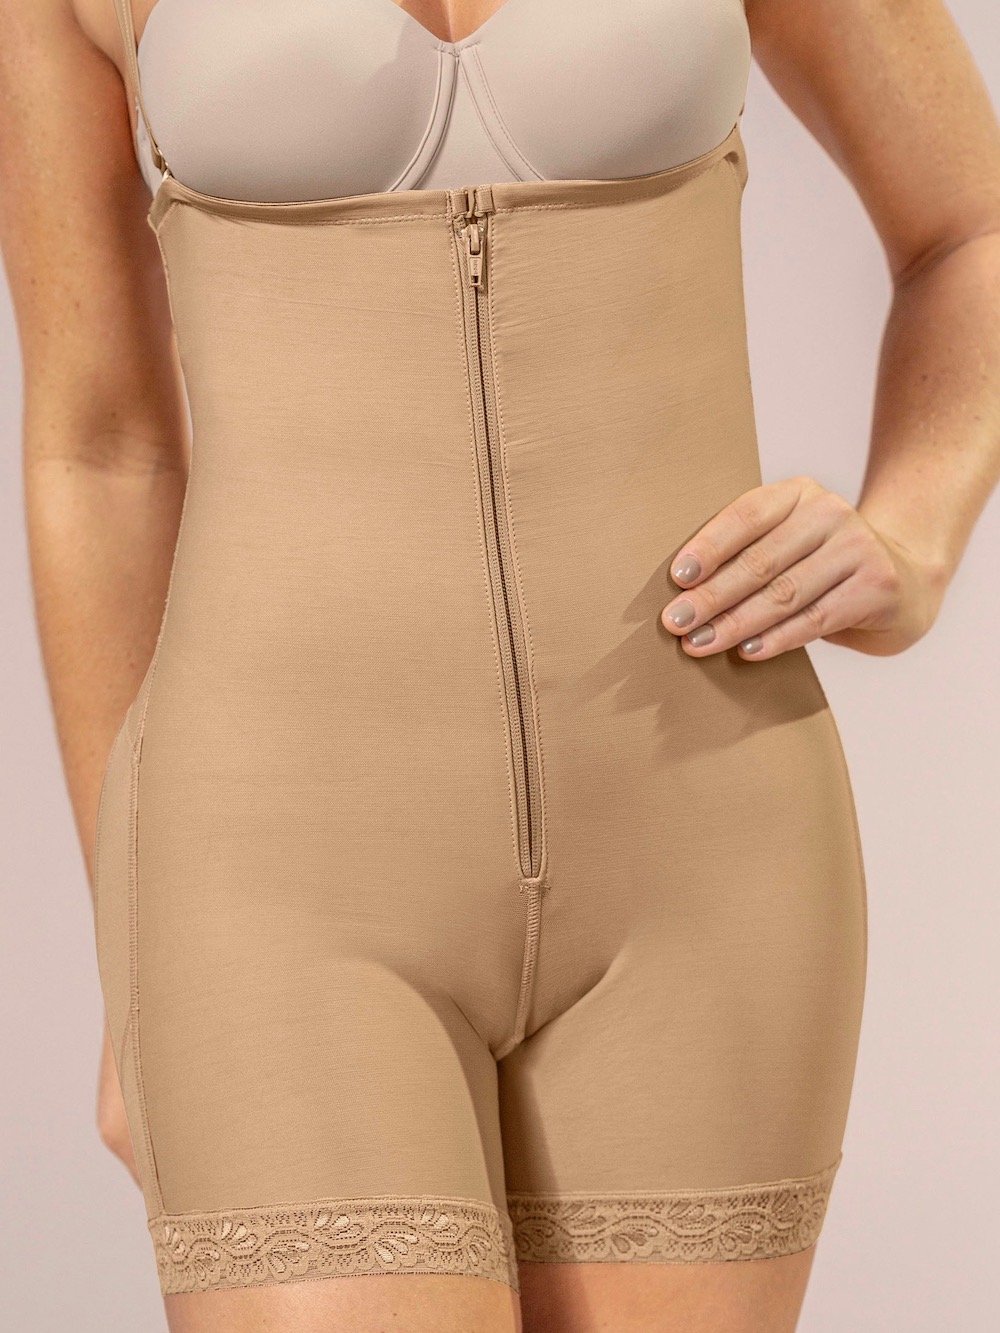 Strapless Body Shaper Shorts with Butt Lifter